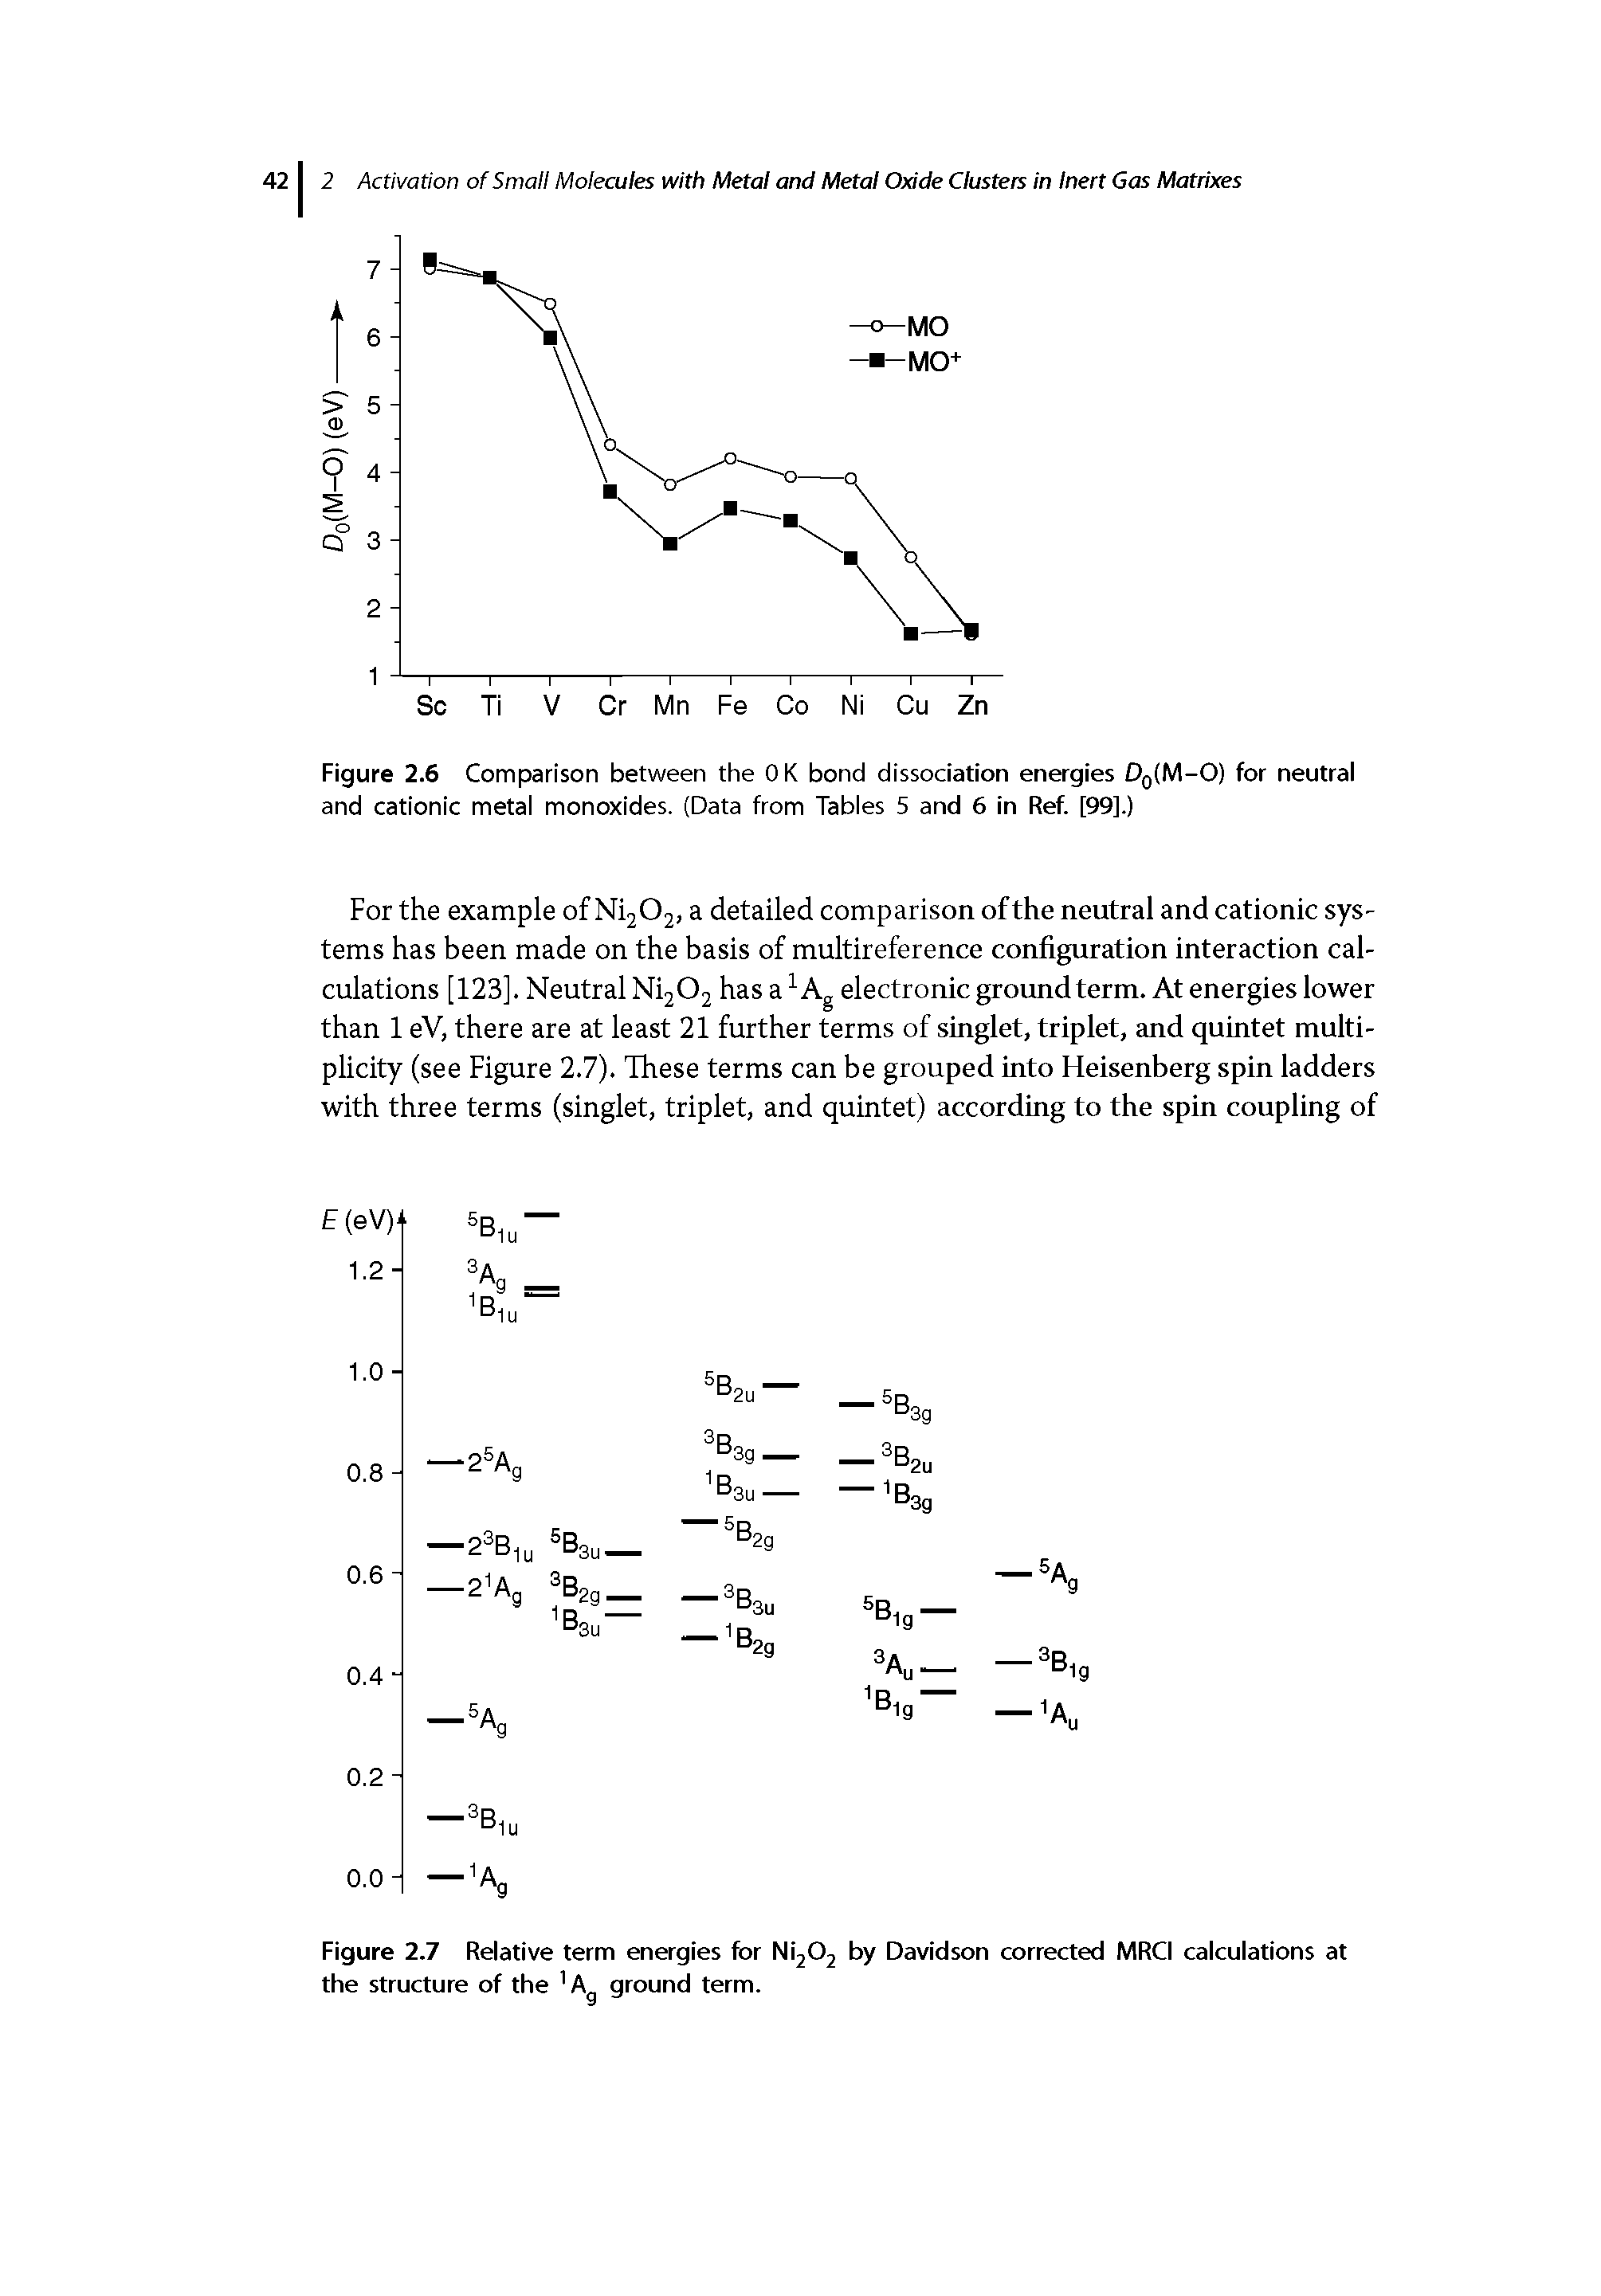 Figure 2.6 Comparison between the 0 K bond dissociation energies Dq(M-O) for neutral and cationic metal monoxides. (Data from Tables 5 and 6 in Ref. [99].)...